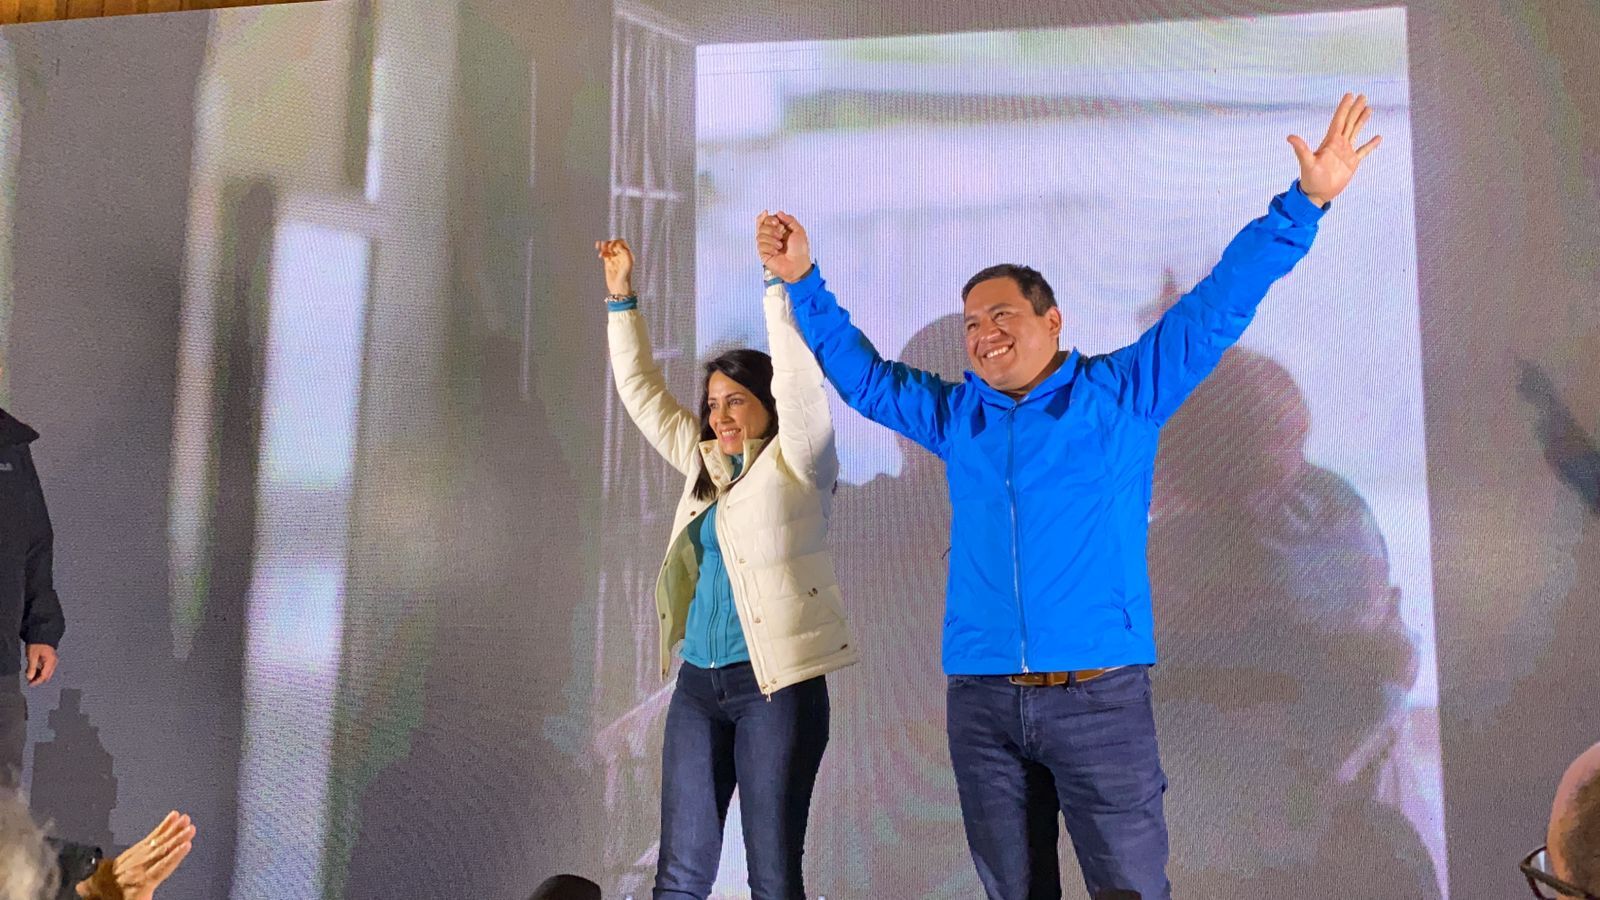 Correismo's presidential candidate Luisa González (left) and her running mate Andrés Arauz (right) celebrate after the first round of the presidential elections in Ecuador, August 20, 2023. Photo: X/@LuisaGonzalezEc.